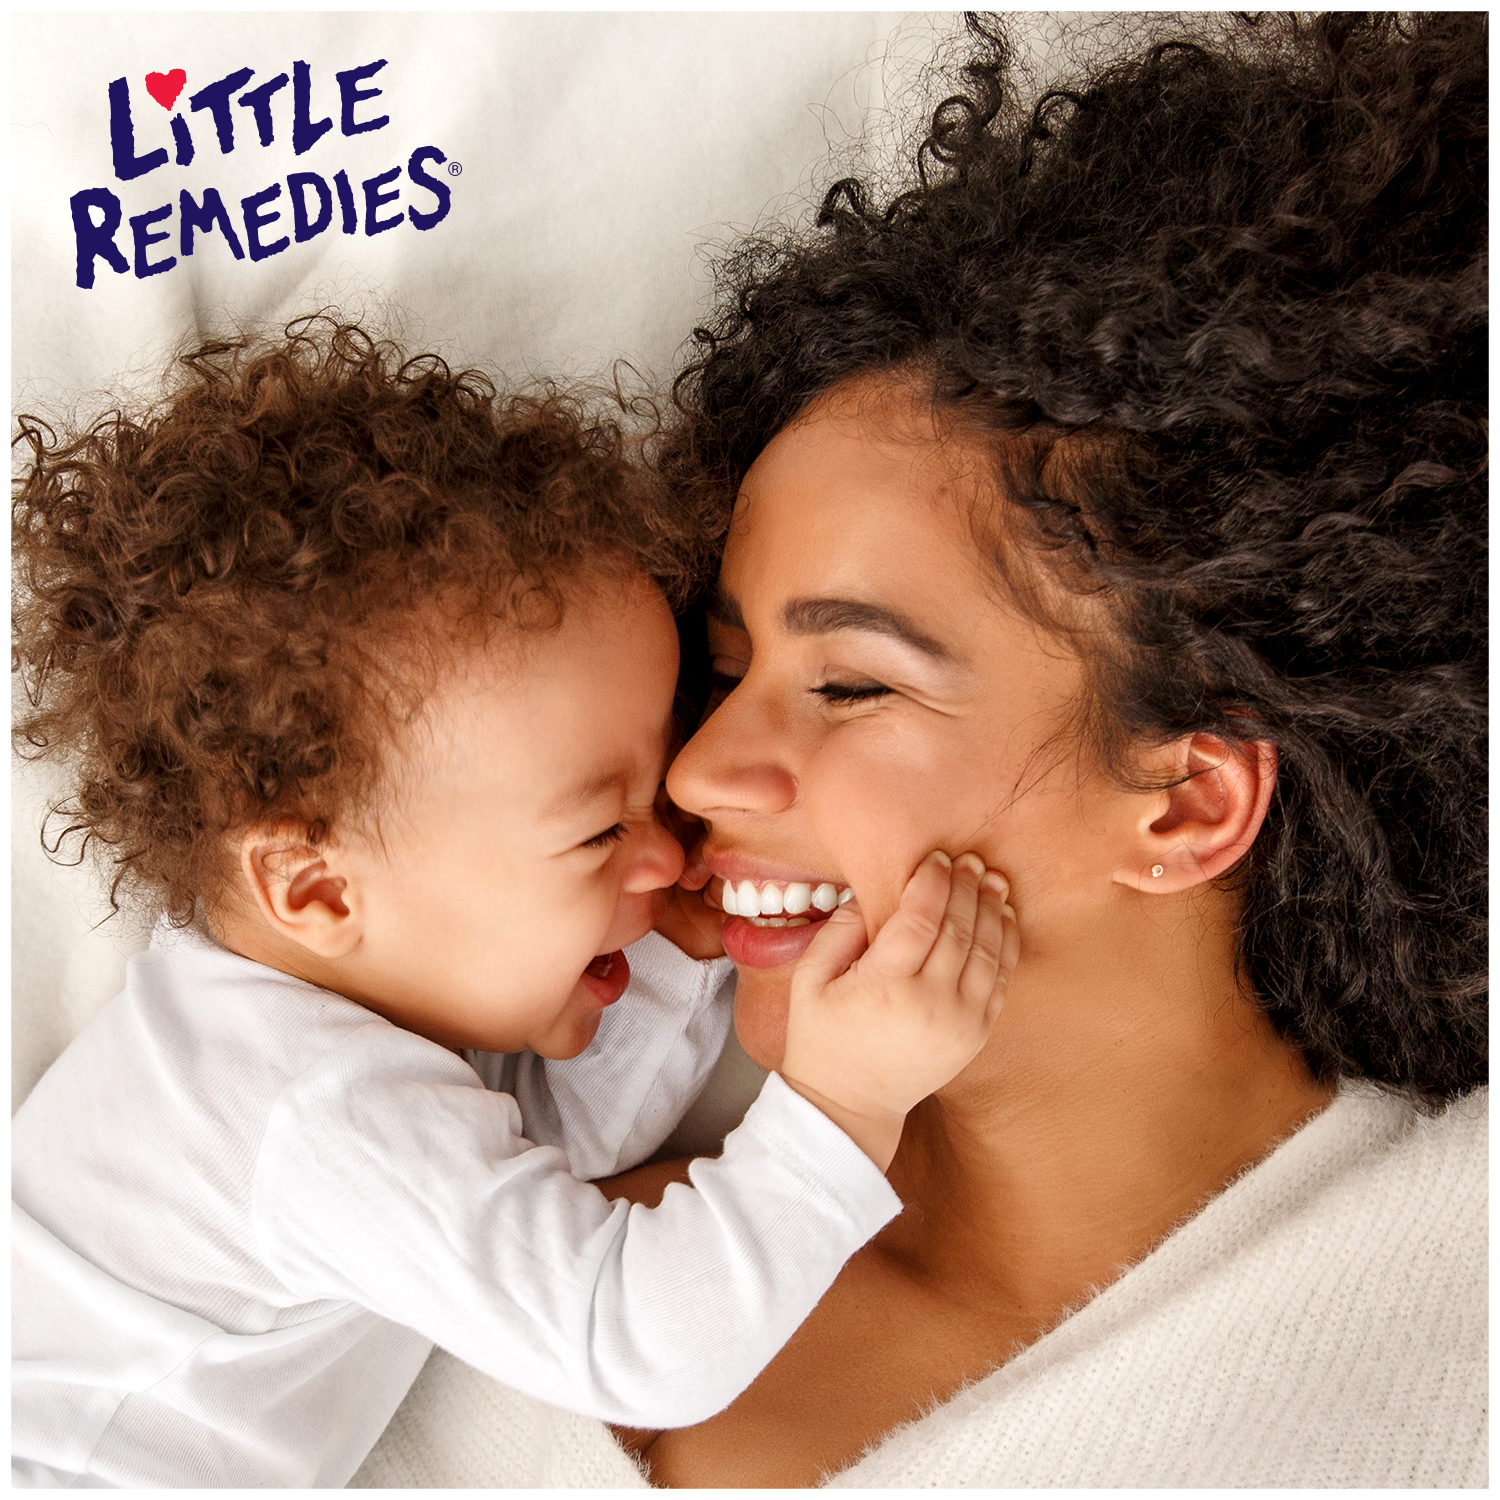 Little Remedies Gas Relief Drops, Natural Berry Flavor, Safe For Newborns, 1 fl oz - image 5 of 16